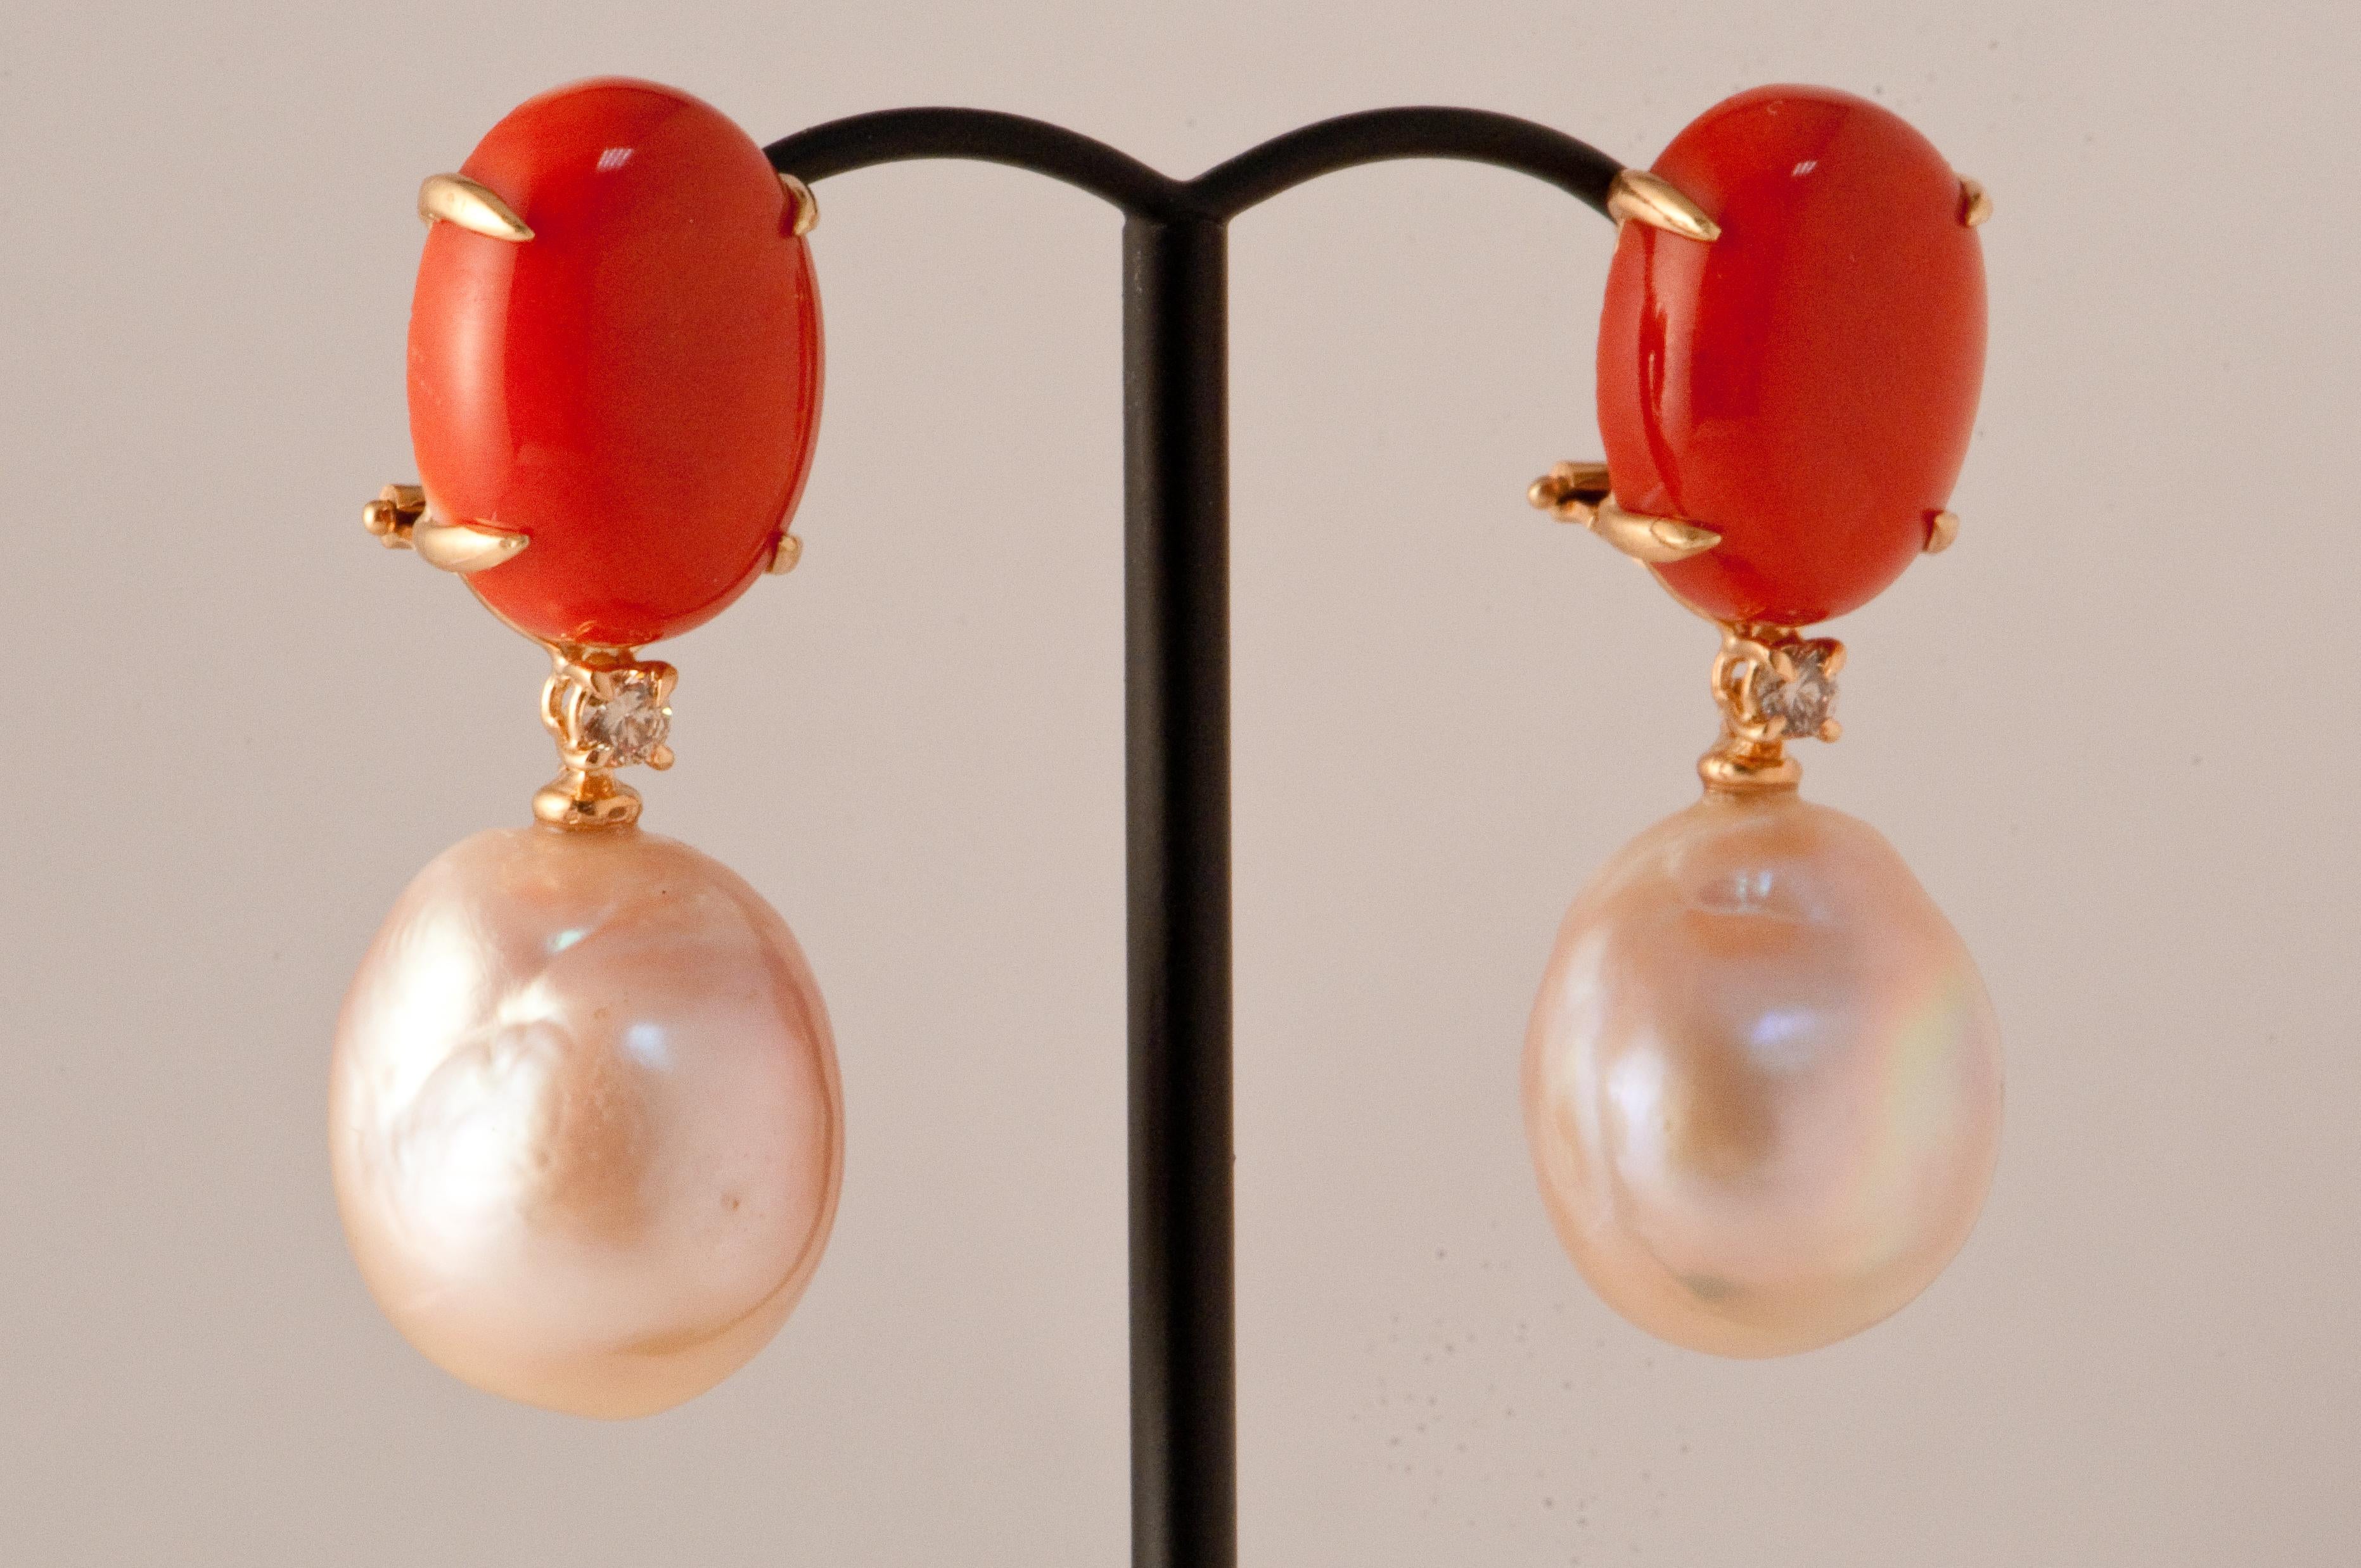 Baroque Pearls Coral and Diamonds Yellow Gold Earrings. Baroque Pearls Coral Diamonds Brilliants FU 0,016 Carat Yellow Gold 18 Carat